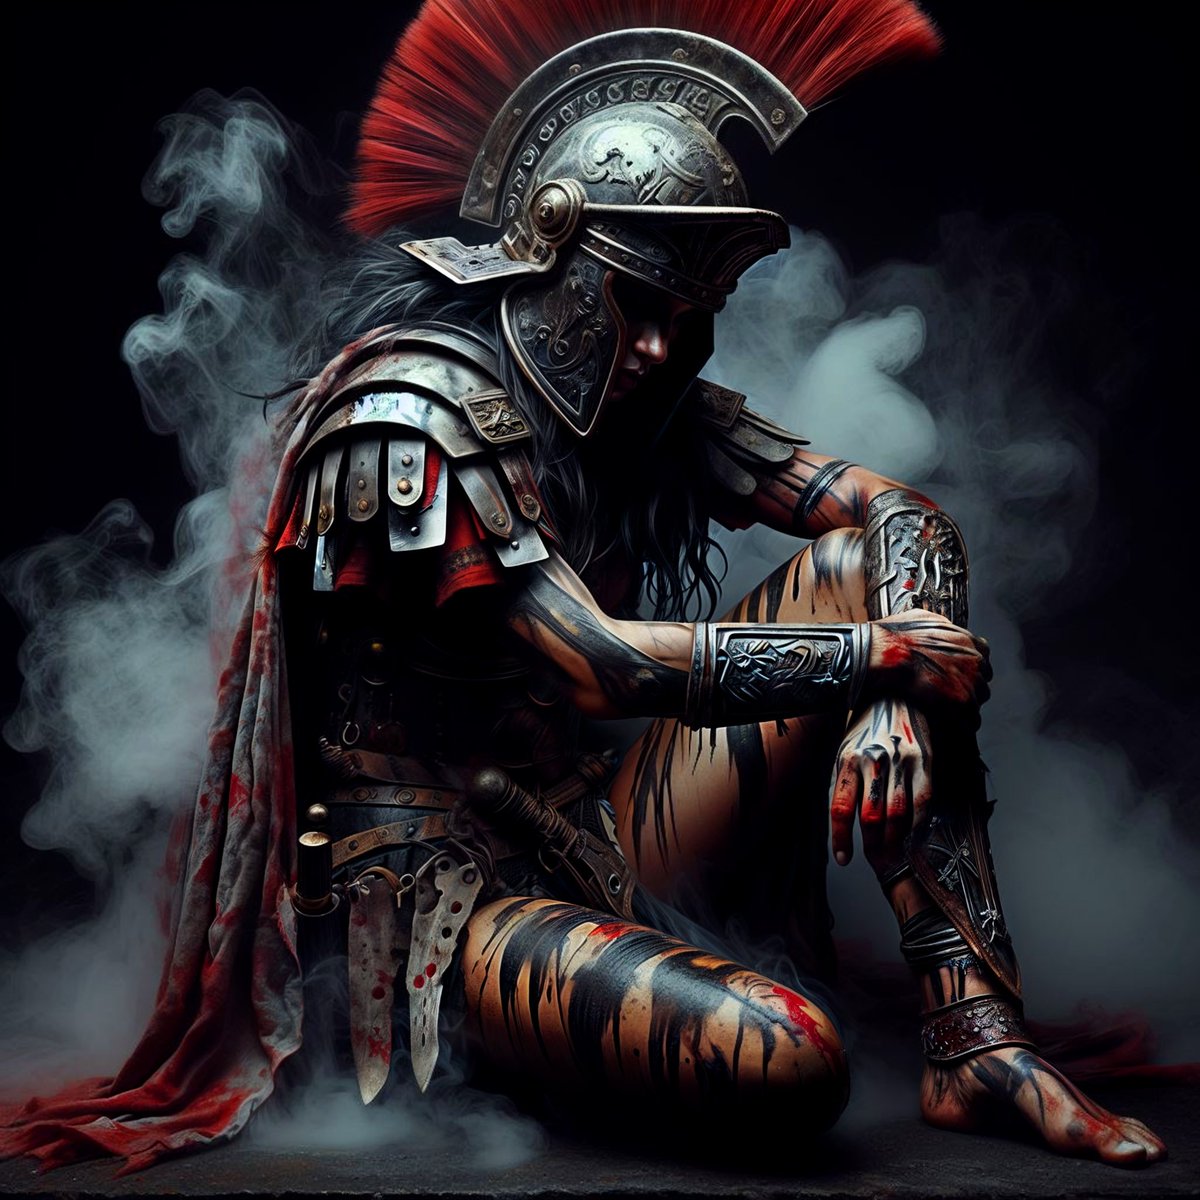 🎊🎊🎊SOLD OUT🎊🎊🎊 Good afternoon🫂 Many thanks to my dear @gmanxrp2 friend for collecting this piece. Congratulations, This is one of my favorite pieces. Best wishes to you! Health, happiness and wealth. ❤️❤️ #DeepPressure #digitalartwork #digitalart #warrior #NFTCommunity